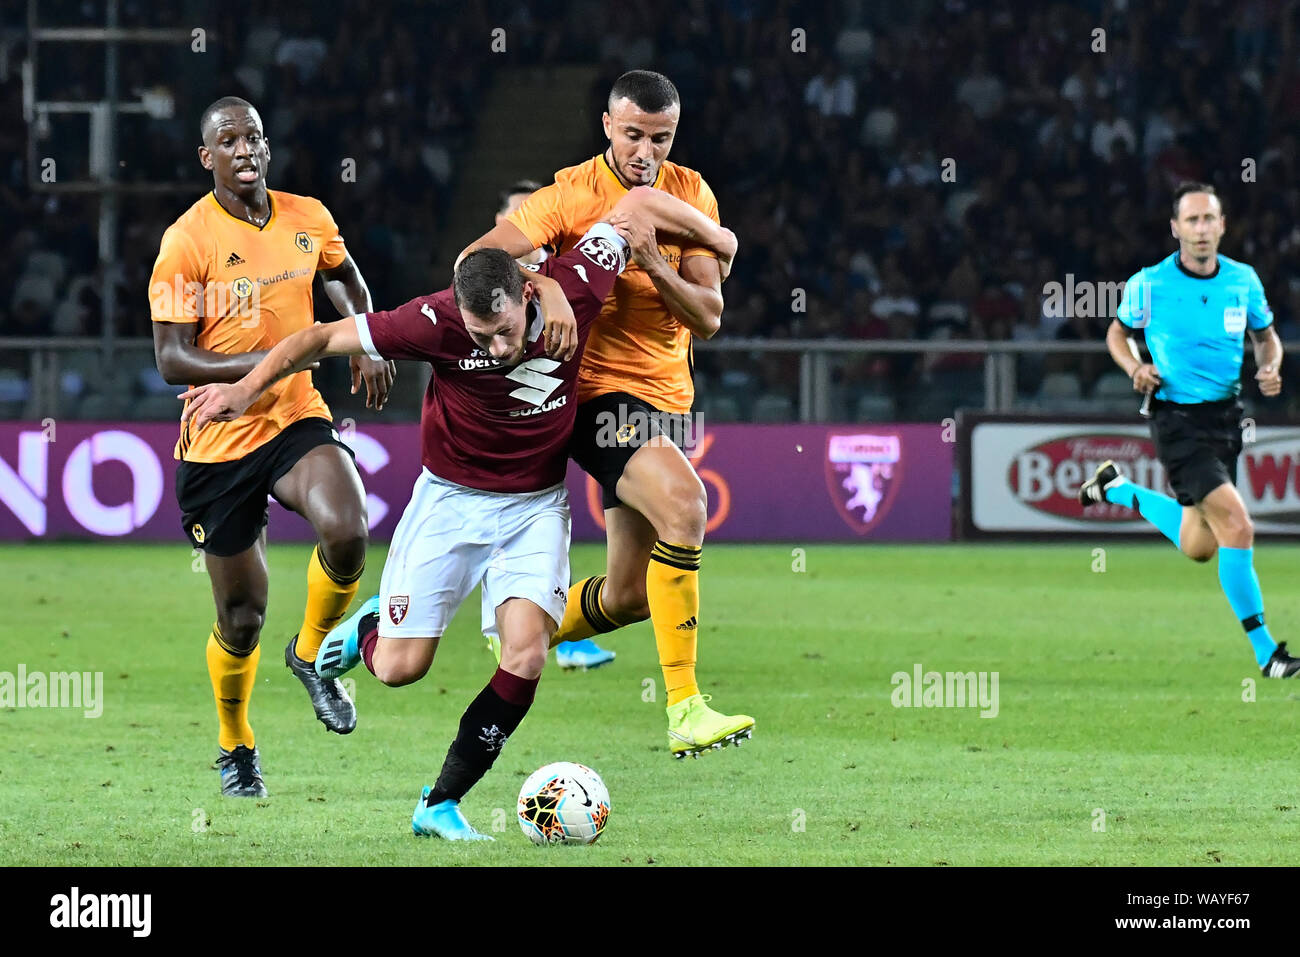 Andrea Belotti (Torino FC) during the Europa League 2019-20 football match between Torino FC and Wolverhampton Wanderers FC at Stadio Grande Torino on 22th August, 2019 in Turin, Italy. Stock Photo